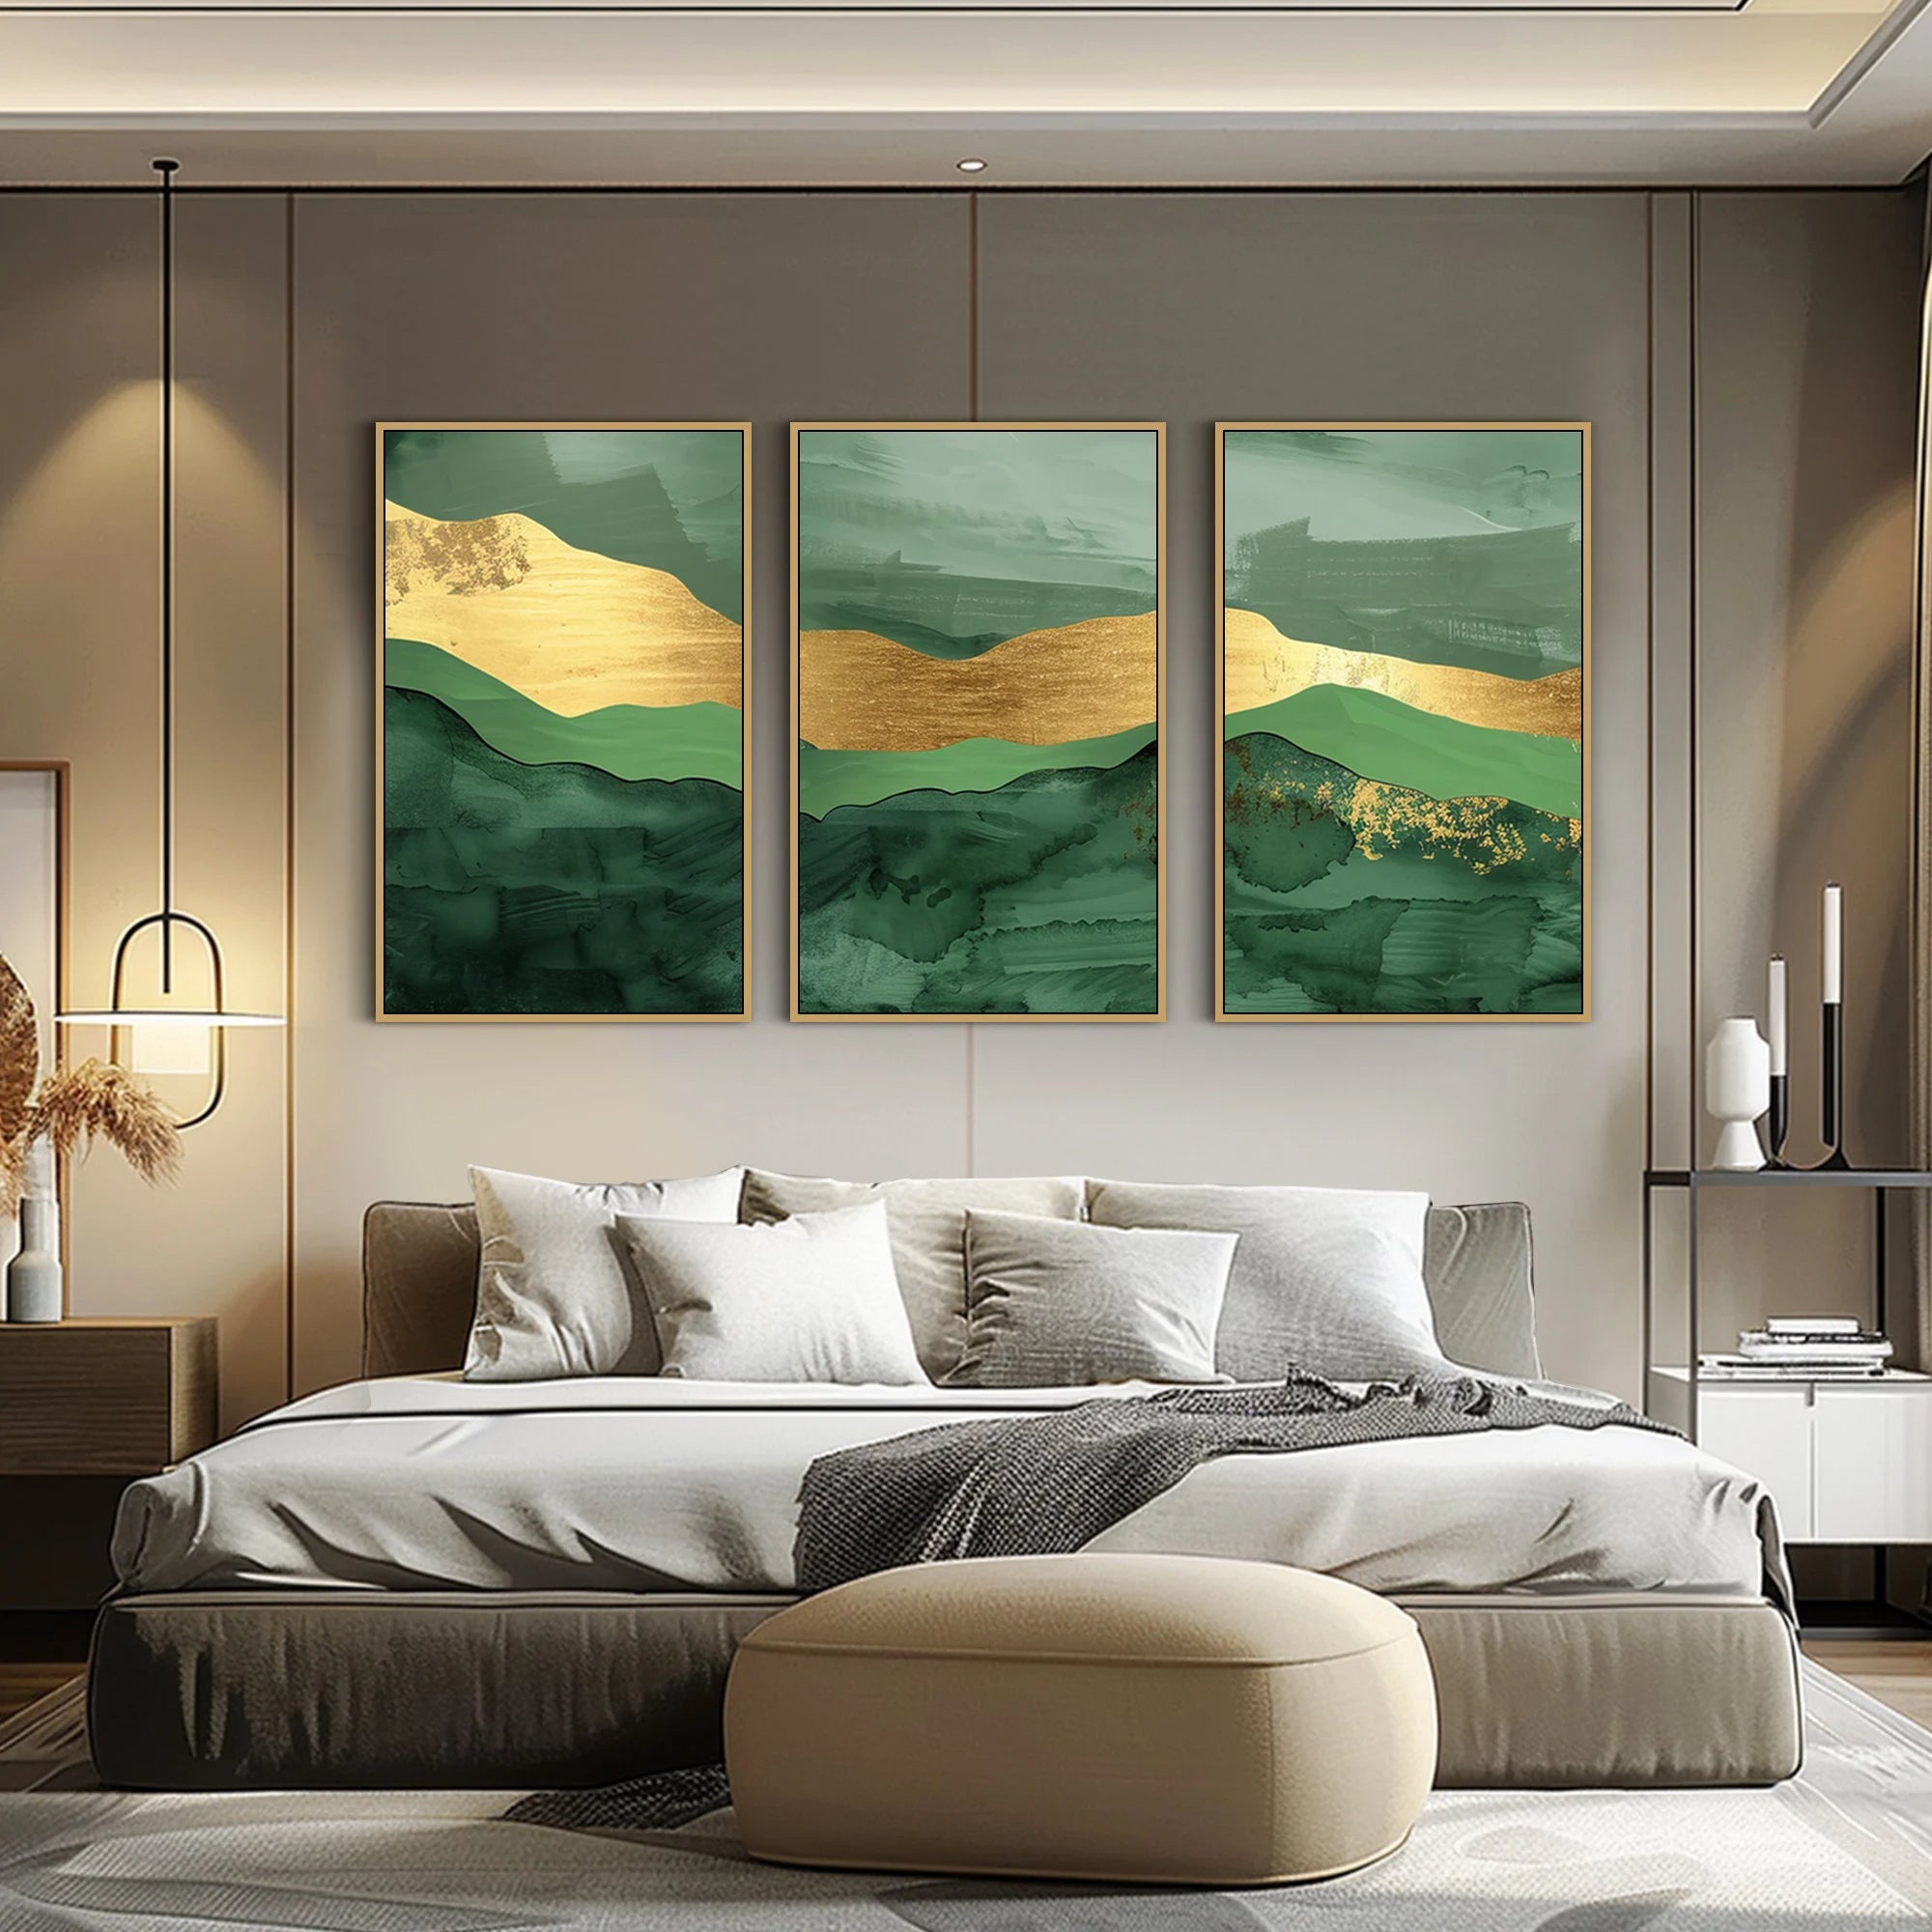 Triptych Tranquility: Embracing Harmony with Three-Panel Oil Paintings